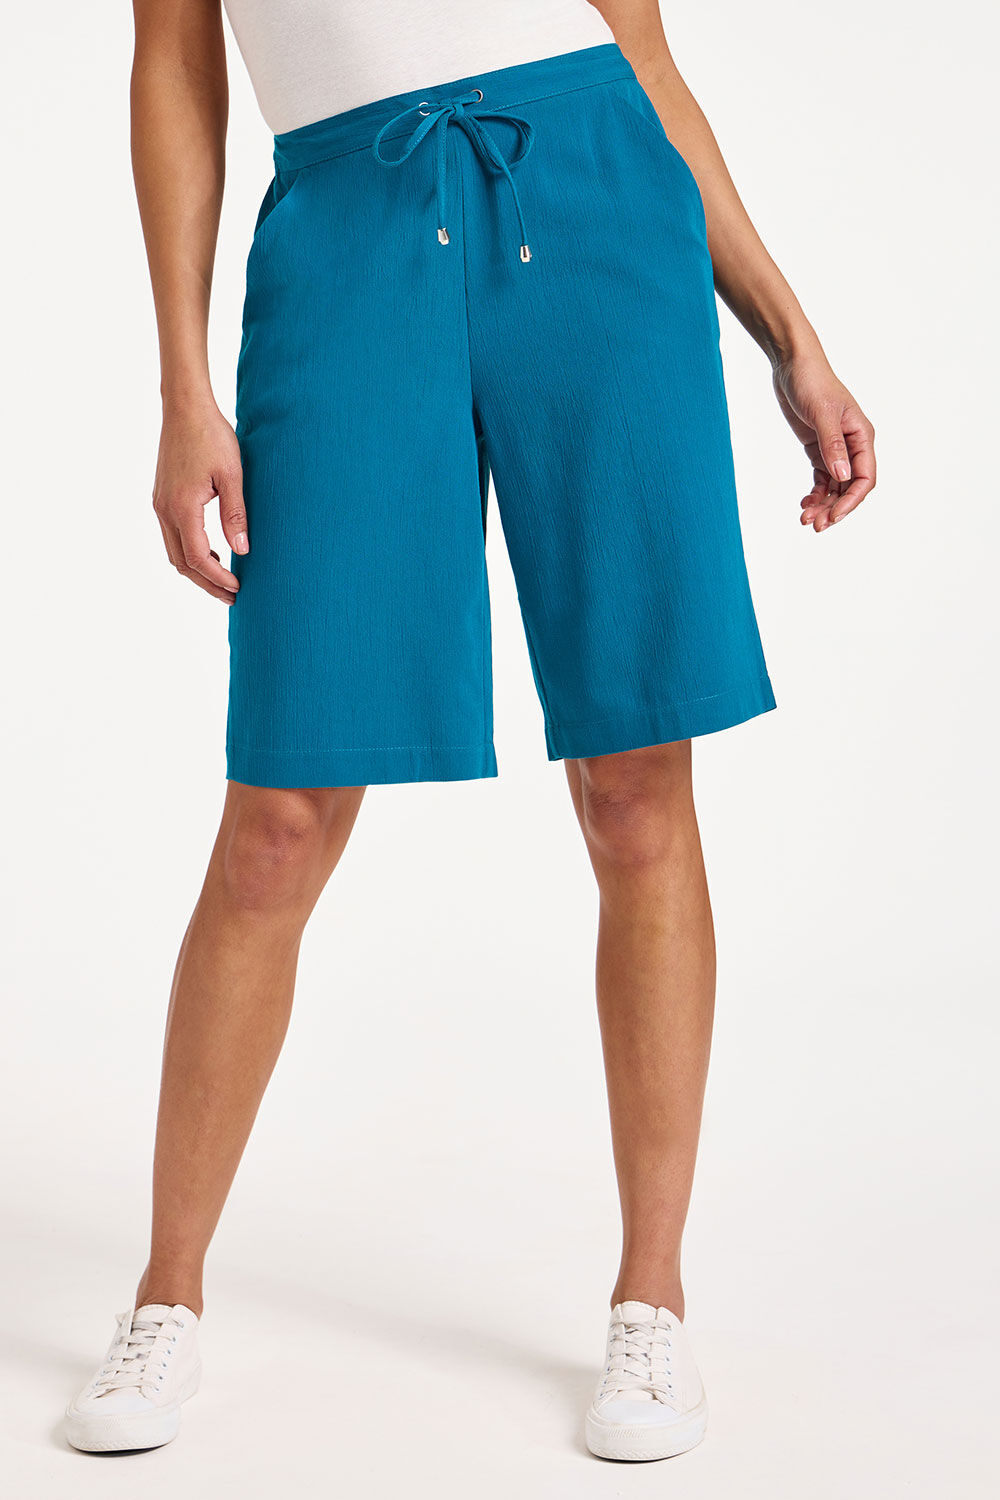 Bonmarche Turquoise Textured Wide Leg Elasticated Shorts, Size: 18